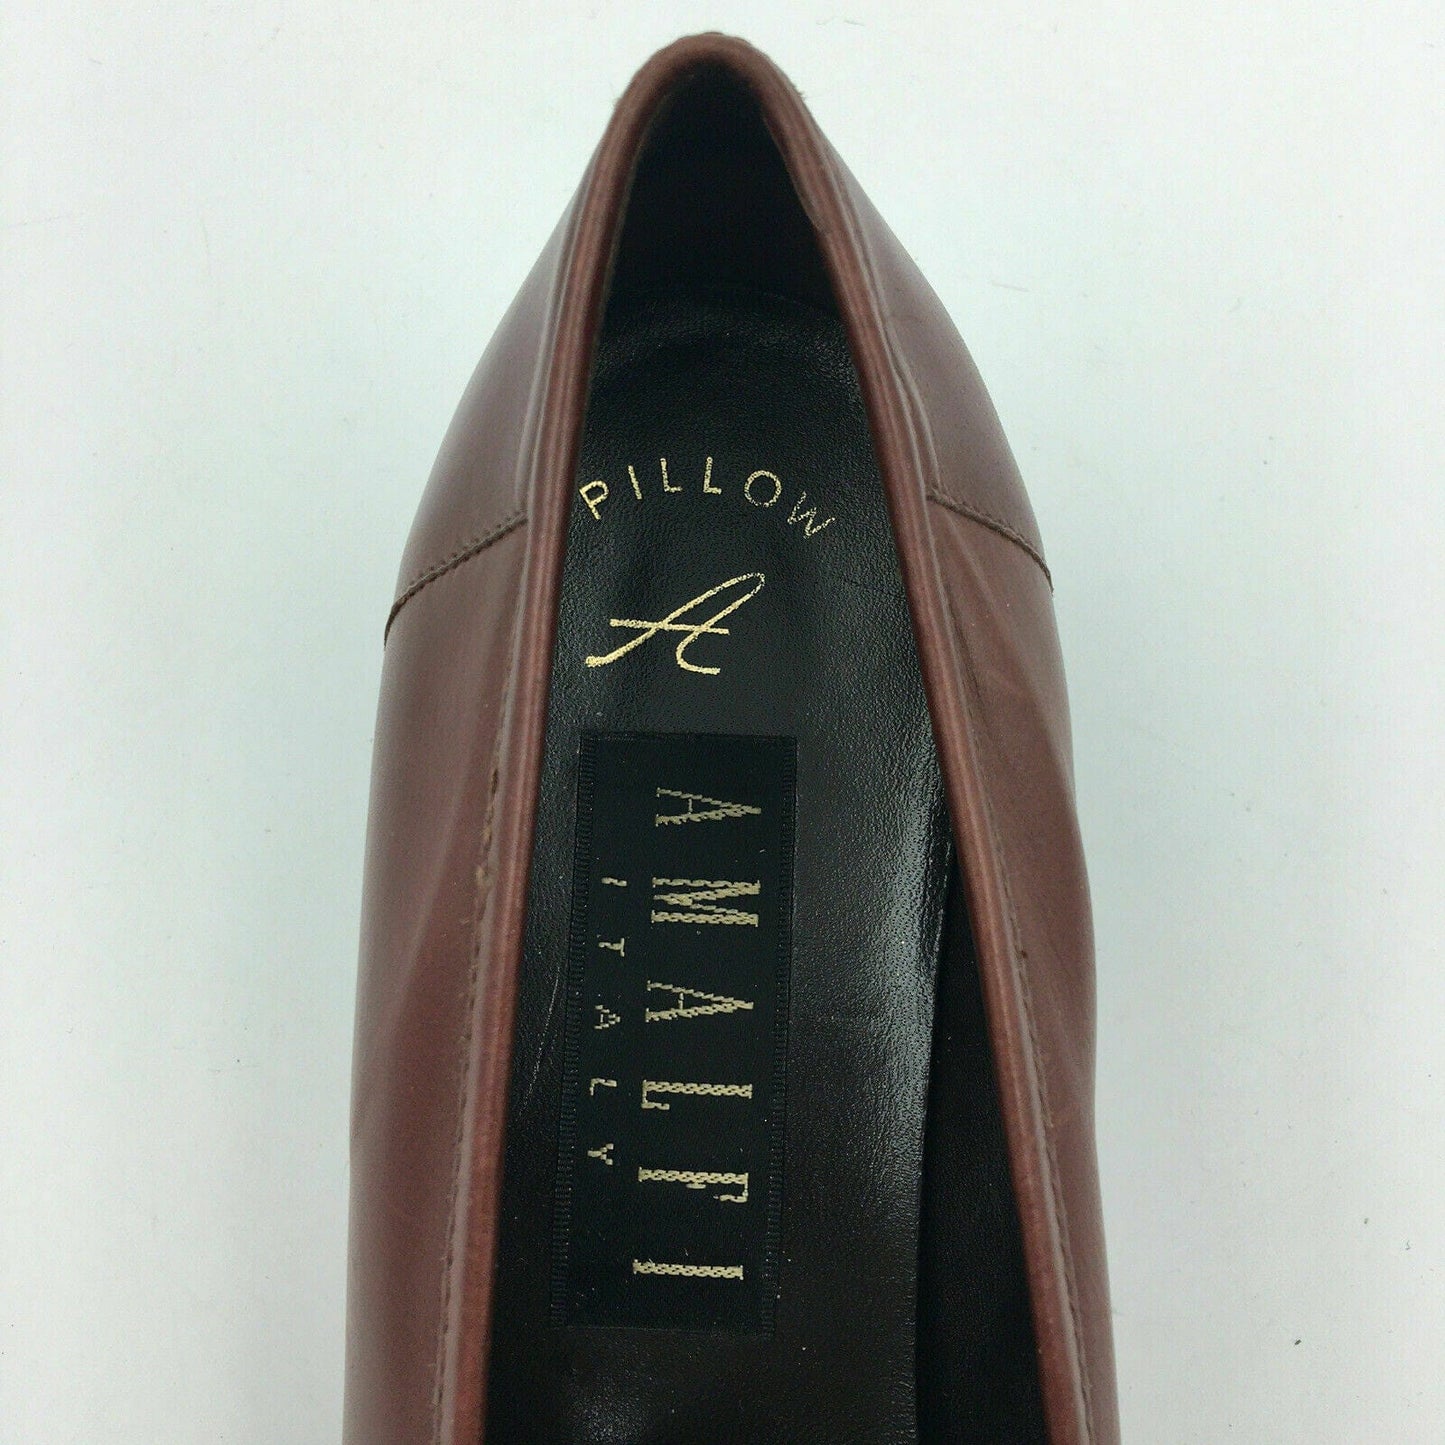 Chic Amalfi Womens “F-Gibson” Italian Leather Loafer Shoes, Size 8.5AA, Pecan Brown